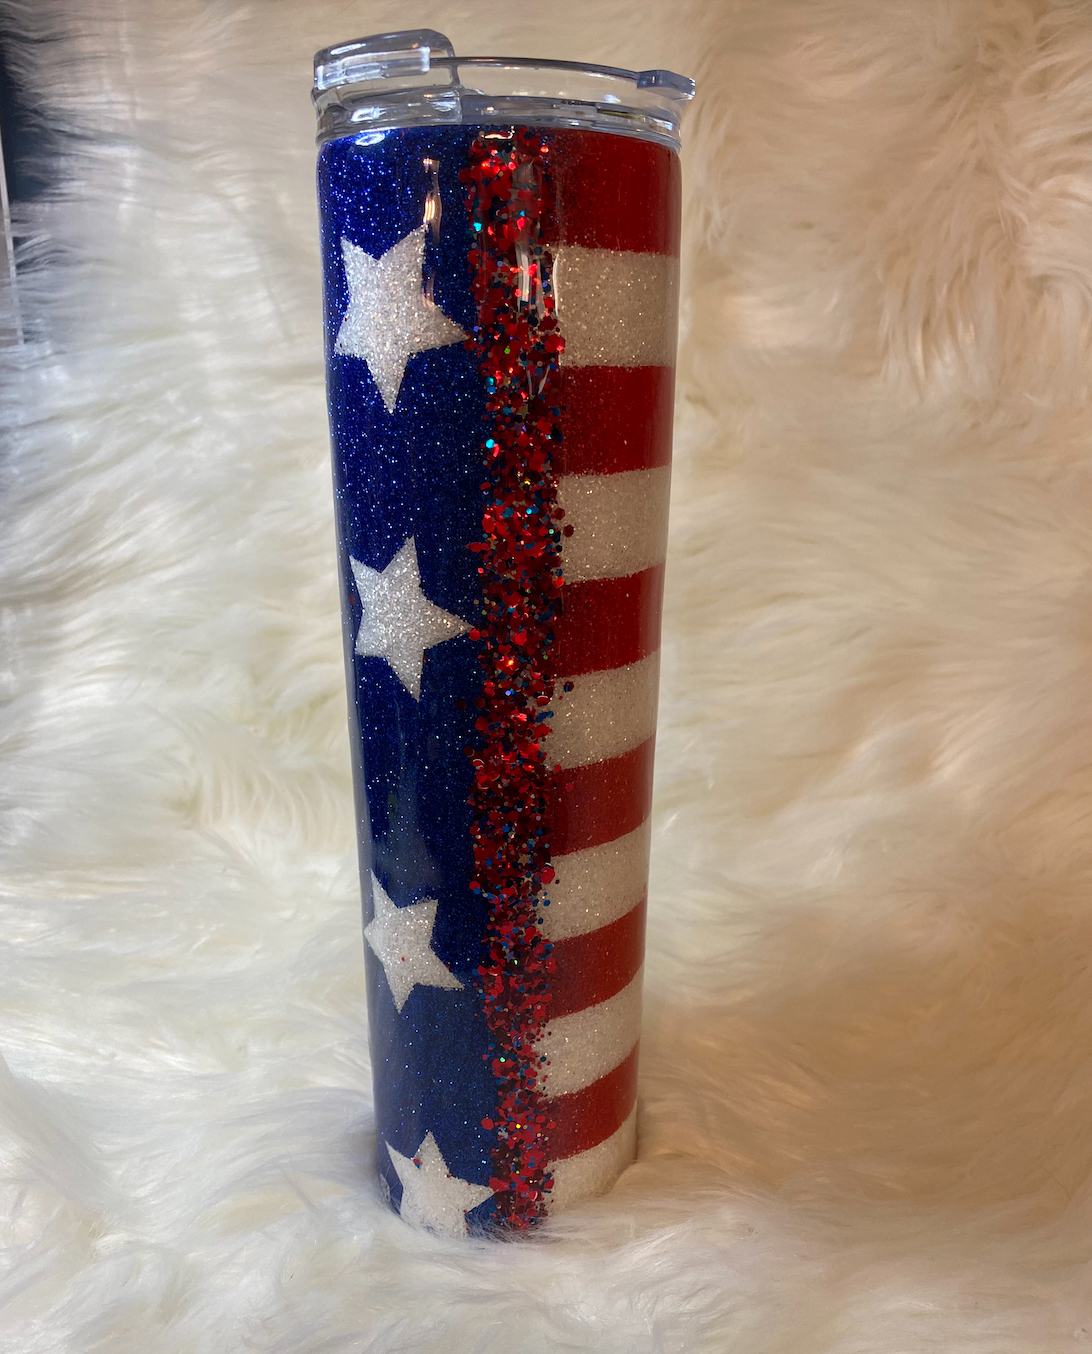 Epoxy Tumblers Kit with Glitter for Tumblers, Includes Clear Cast Epoxy for  Tumblers, Silicone Epoxy Resin Brush, Glitter for Tumblers and Other Epoxy  Tumbler S…